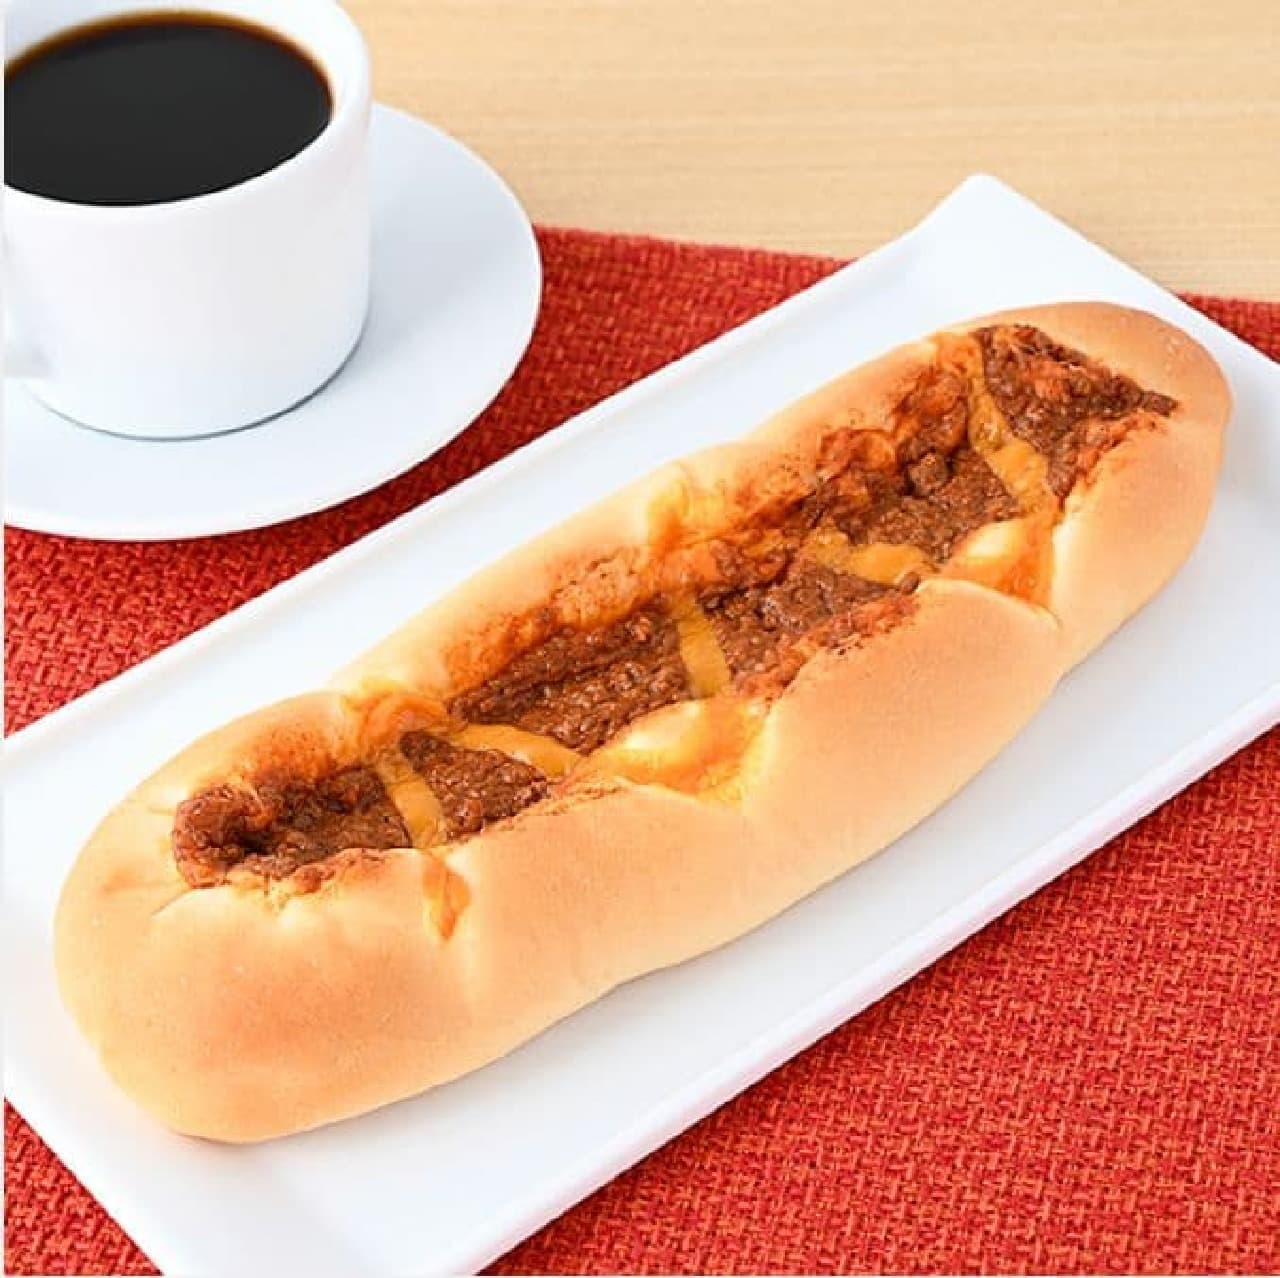 FamilyMart "Taco Meat Bread with Chili Sauce